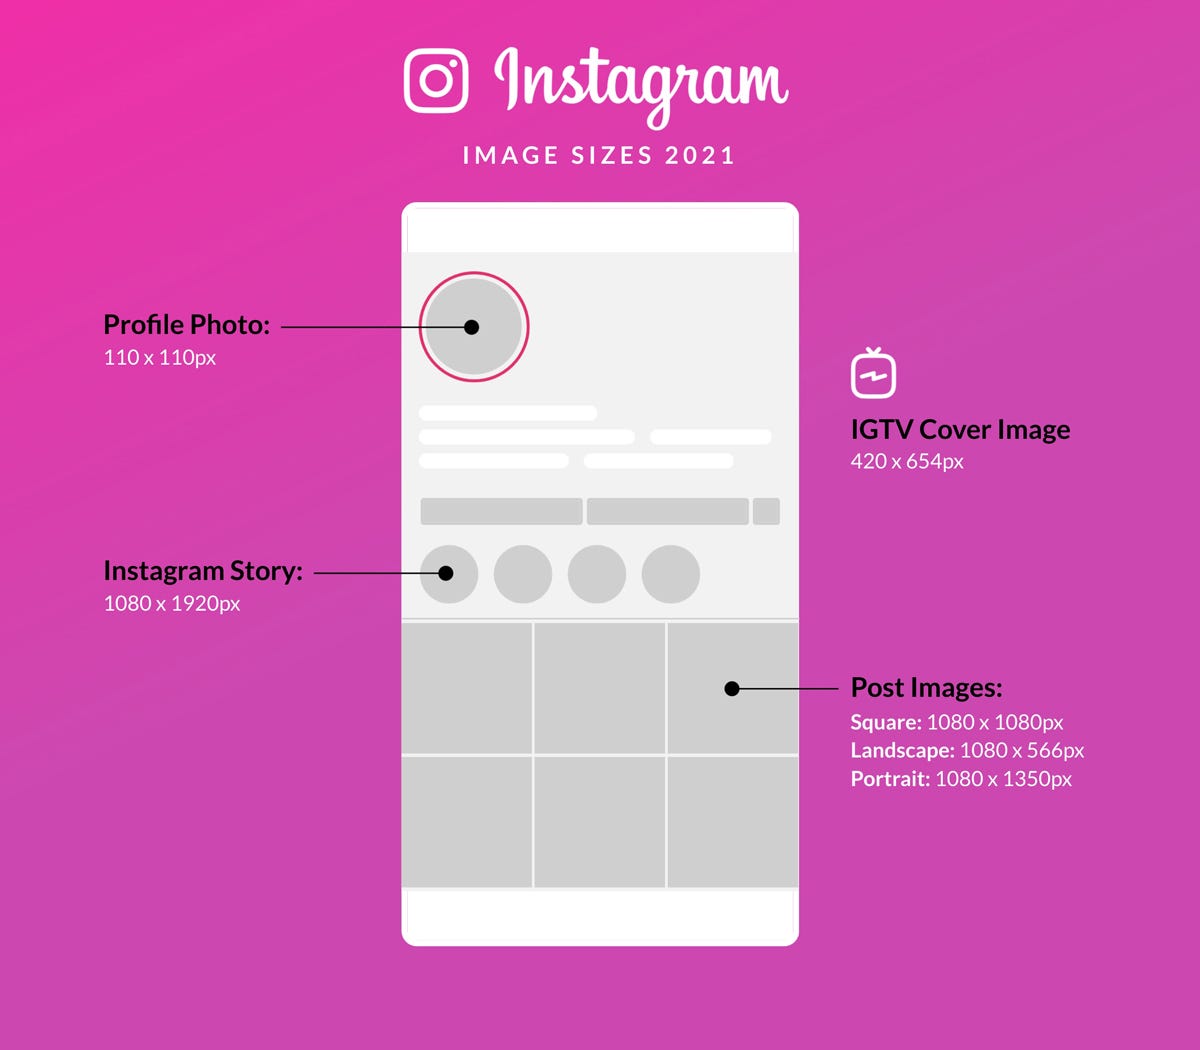 The Complete Guide to Social Media Image Sizes (In 2021) | by Faizan Bhatti  | Medium